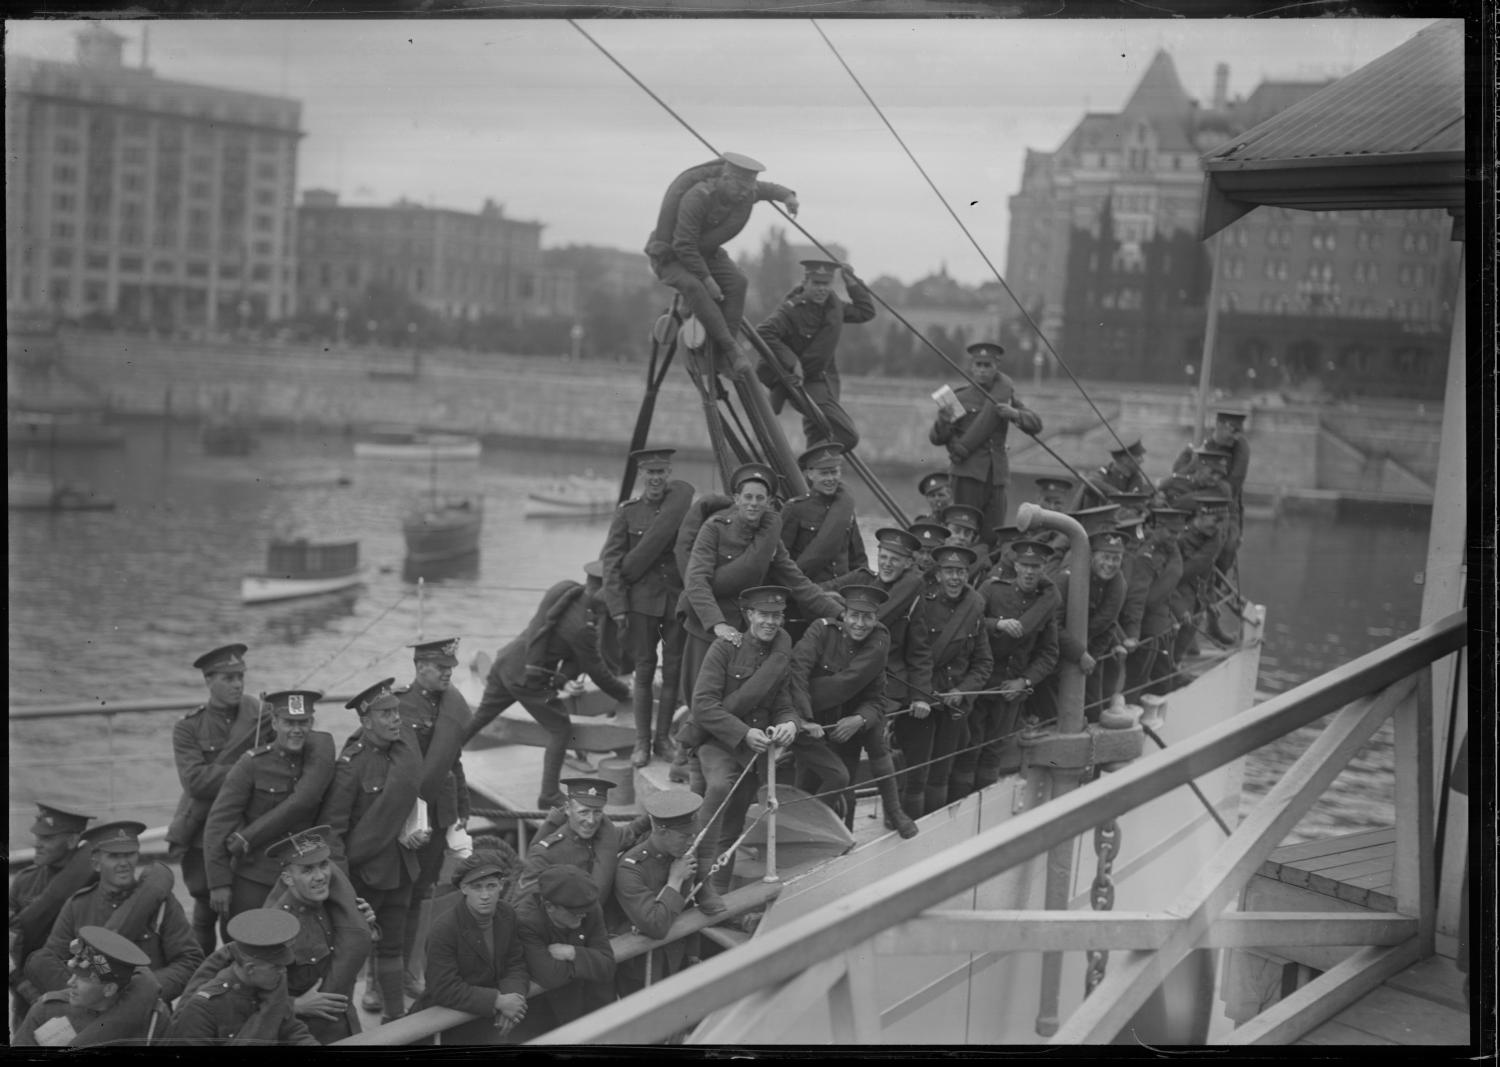 Photograph depicts a draft of soldiers from the Royal Canadian Garrison Artillery. These soldiers are aboard the SS Princess Victoria, a CPR steamship that would transport the soldiers from Victoria to the train station in Vancouver. In this particular shot, some soldiers wear decorated hats and hold care packages. Part of the Empress Hotel can be seen in the background. 